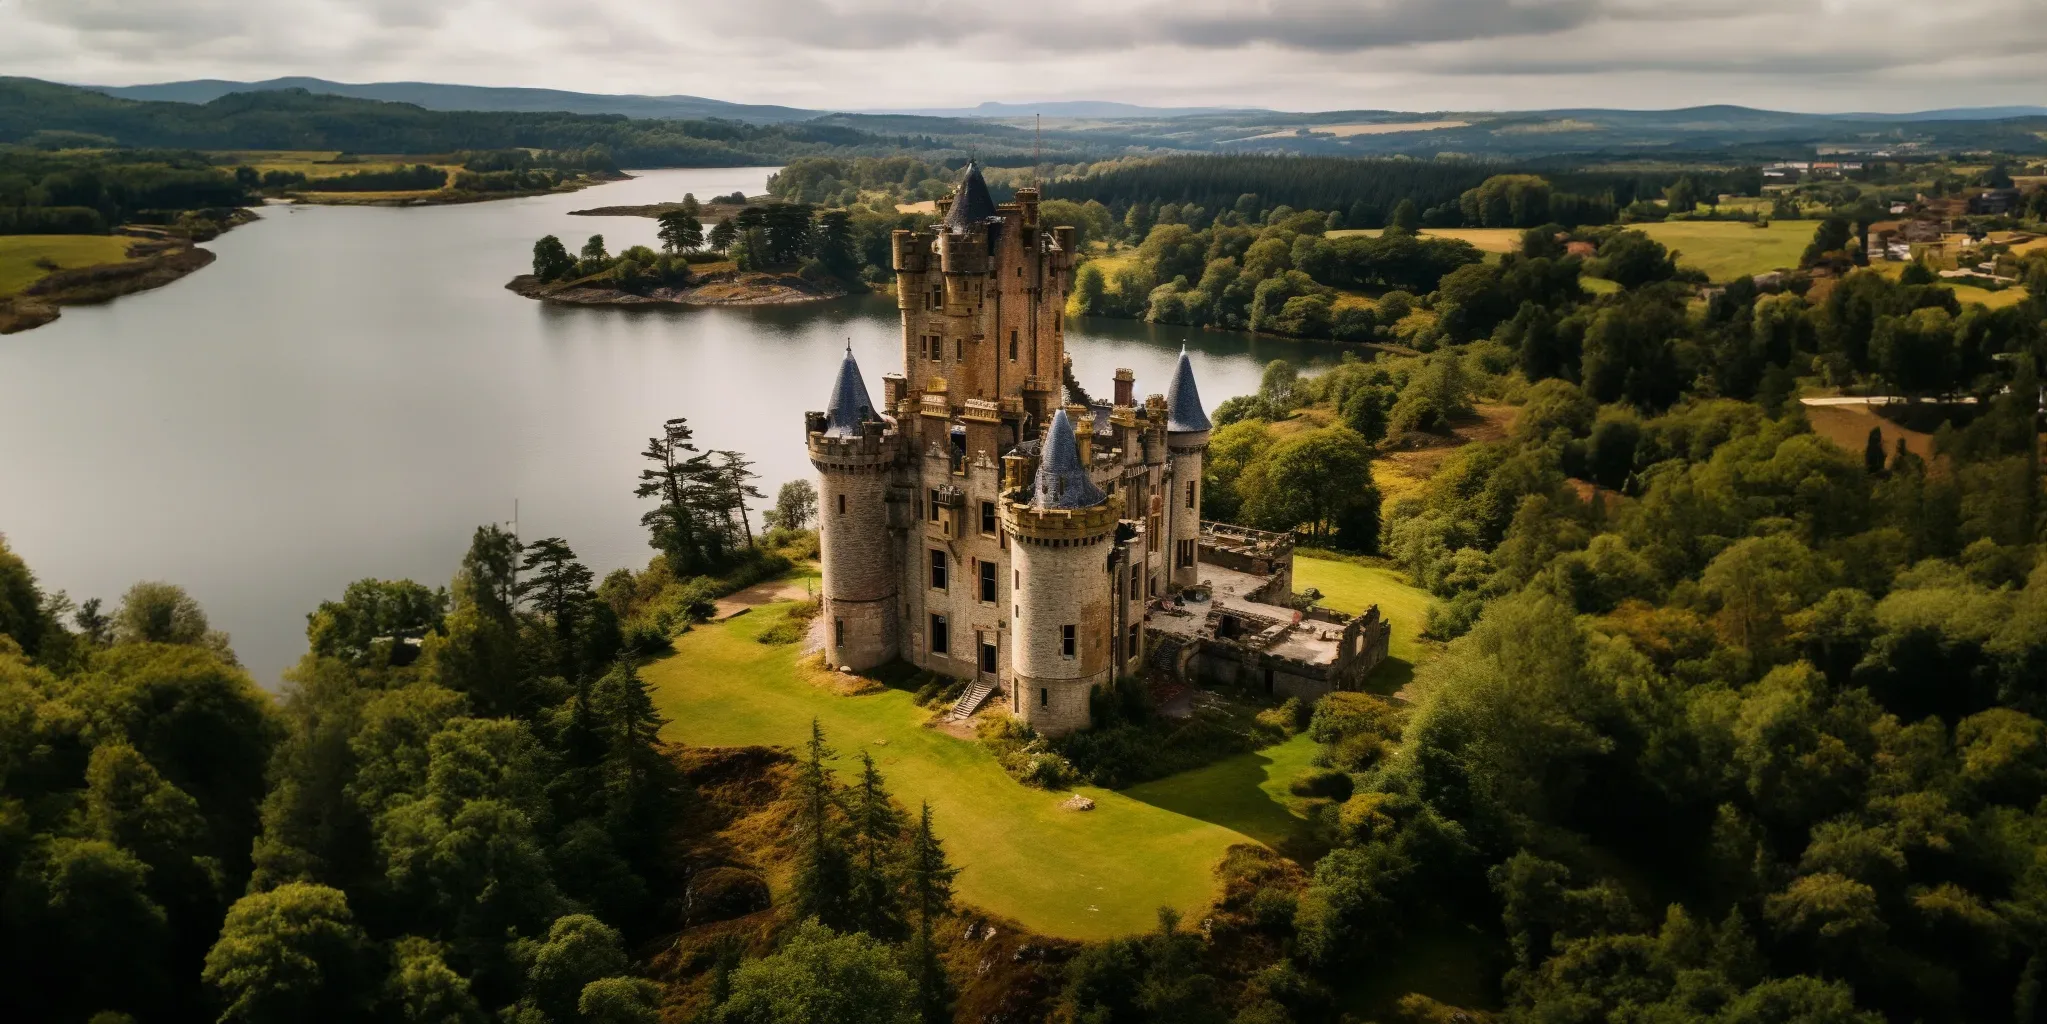 An aerial view of a castle in scotland. Drone Photography at weddings. My top wedding tips